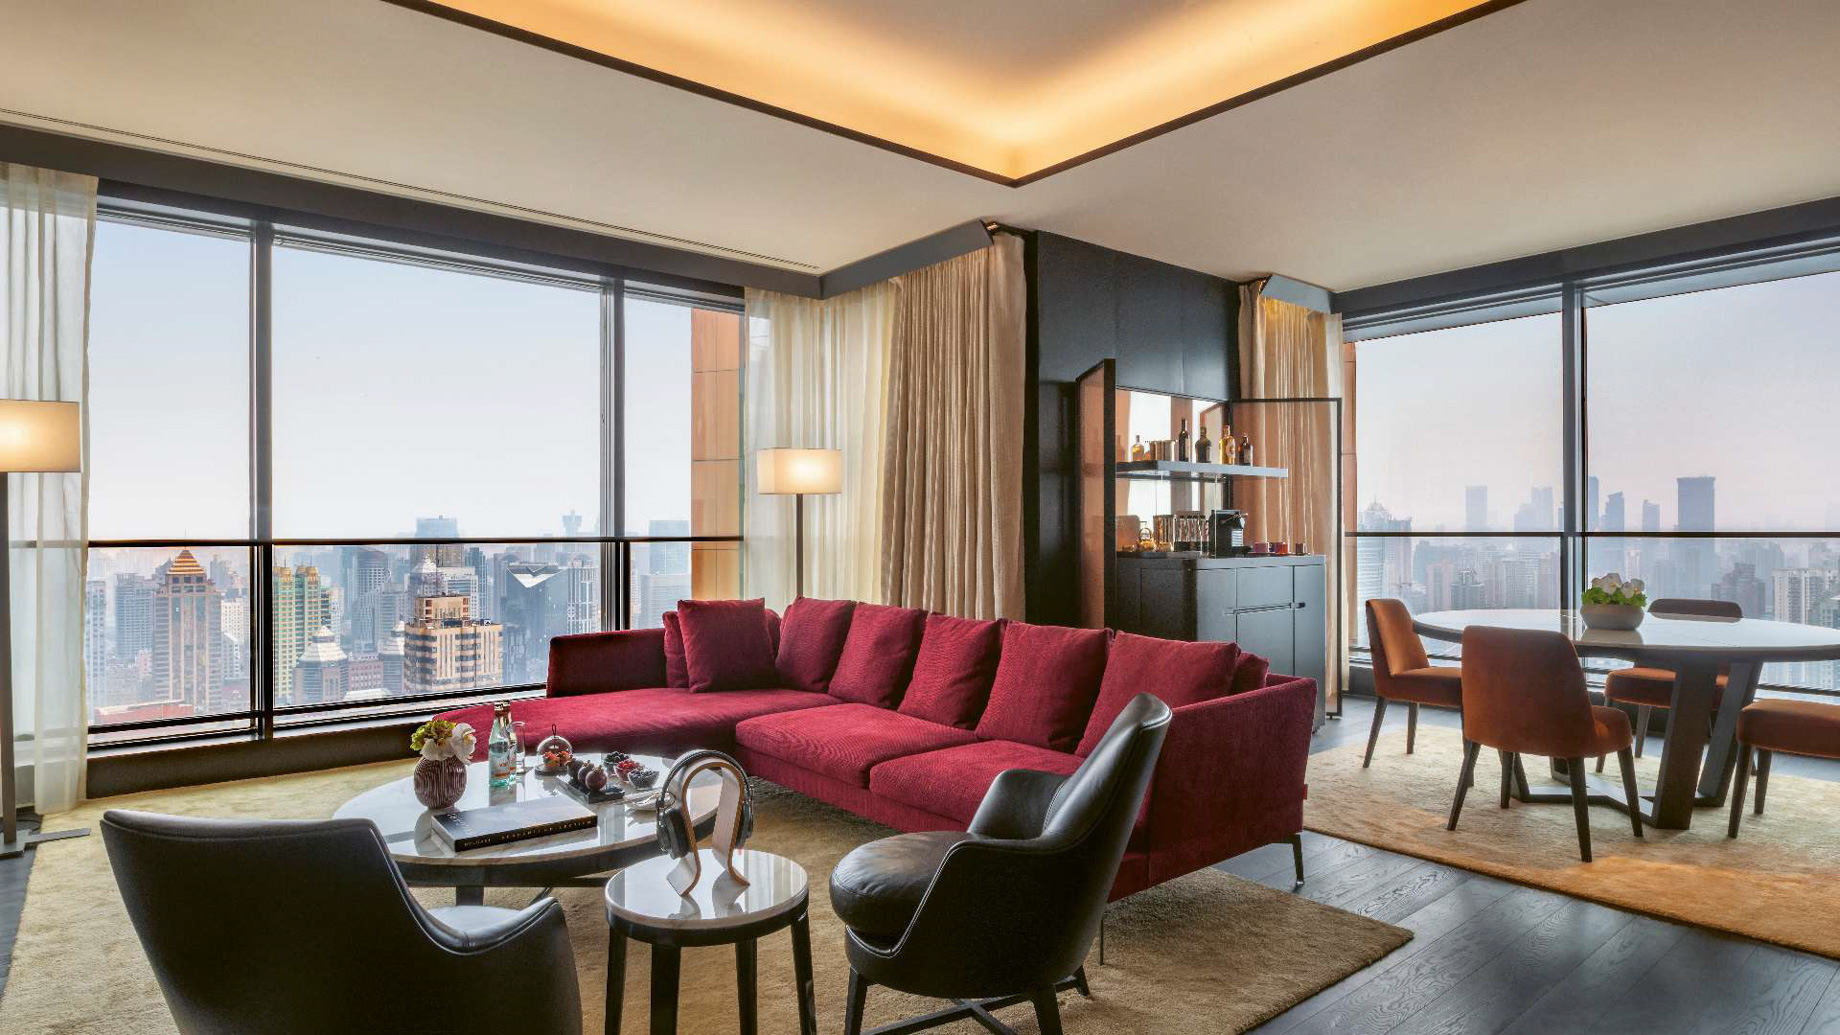 Bvlgari Hotel Shanghai – Shanghai, China – Guest Rooms and Suites